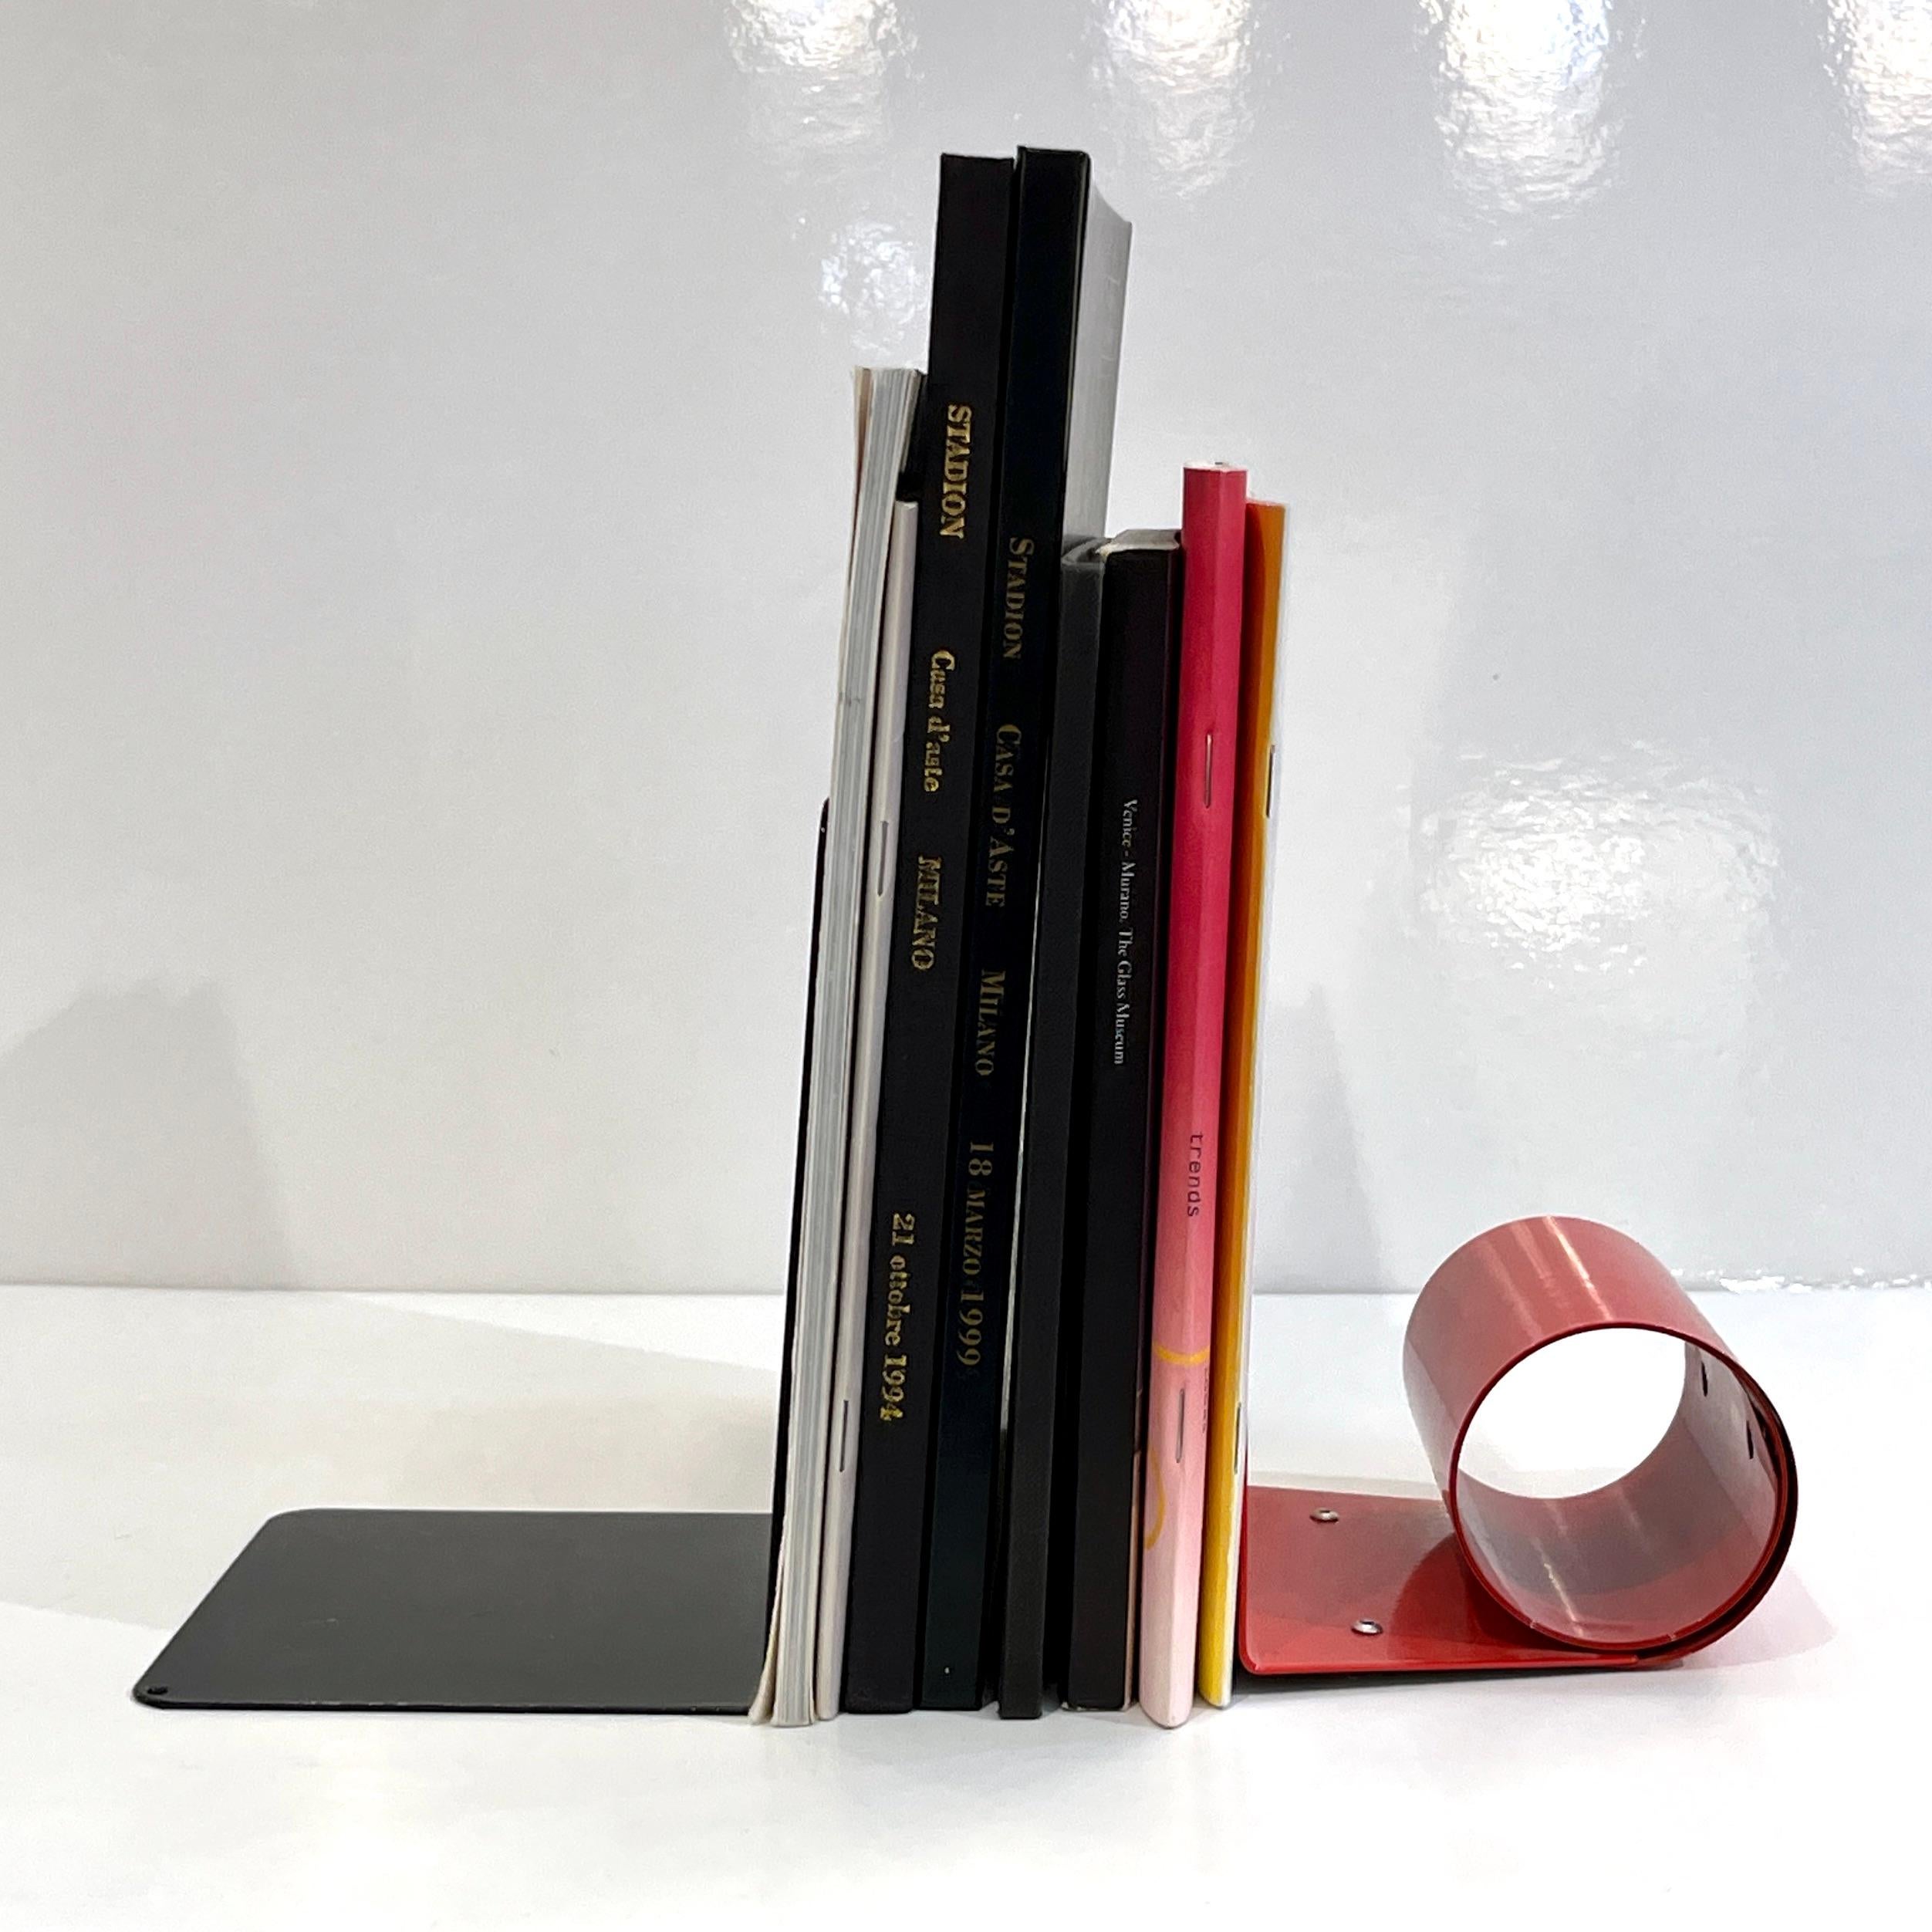 Modern stylish design metal bookends in shiny lacquered black & red color. Both bookends are made complementary in style but with different geometric form. The black bookend has pierced geometry detail, allowing for light reflections. The red